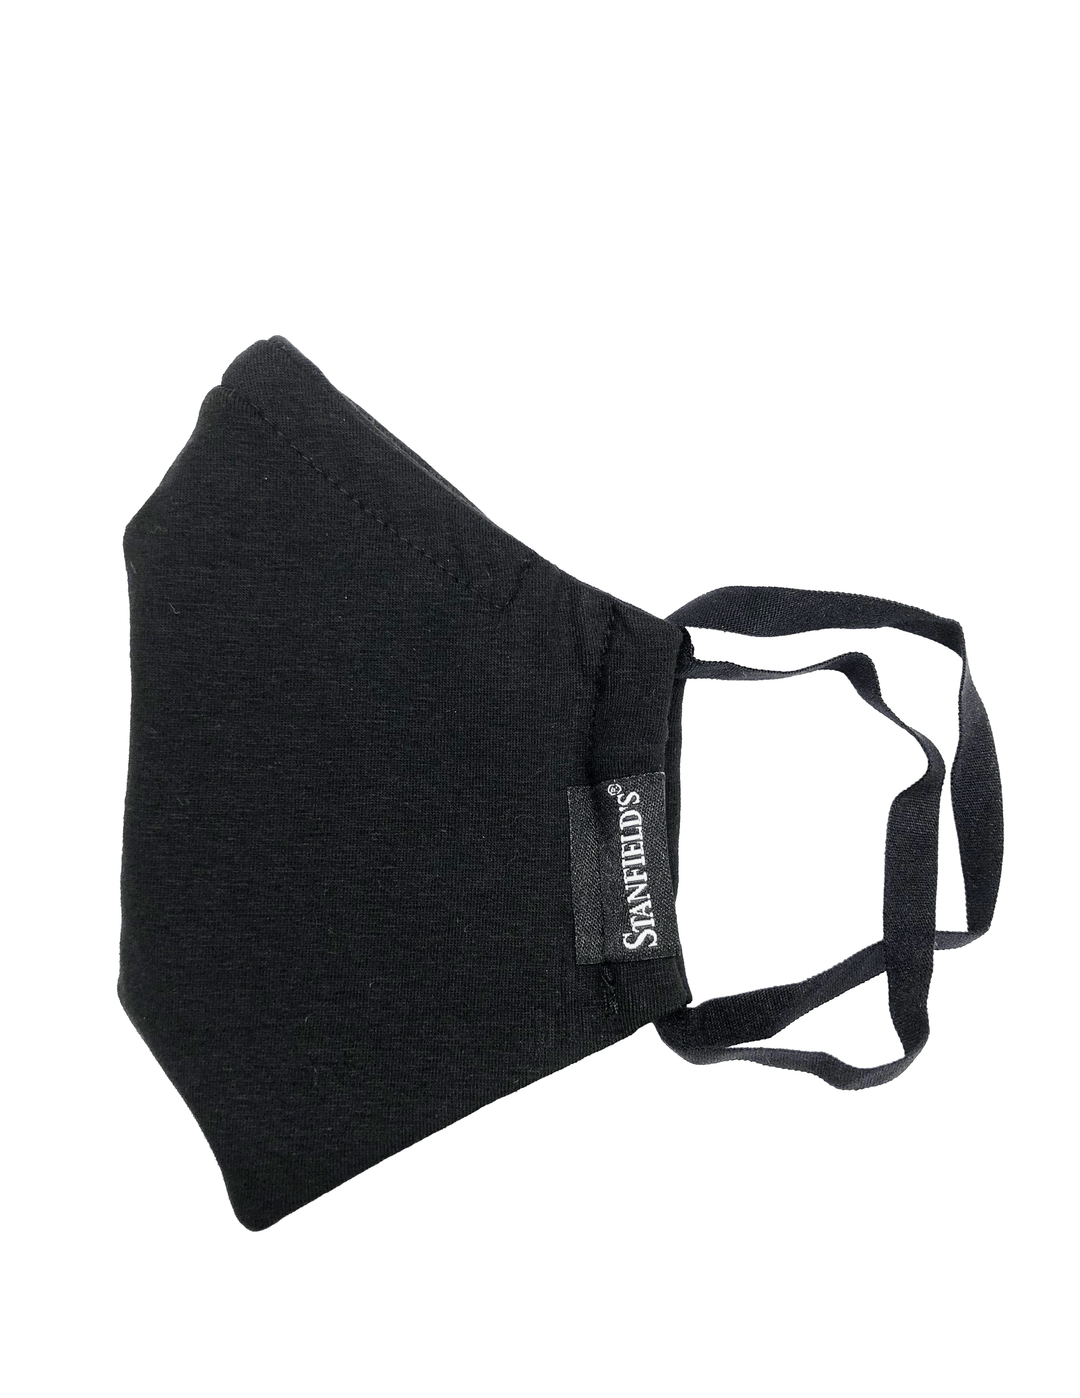 Take It Outside Stanfield's Reusable 3-Layer Cotton Face Mask